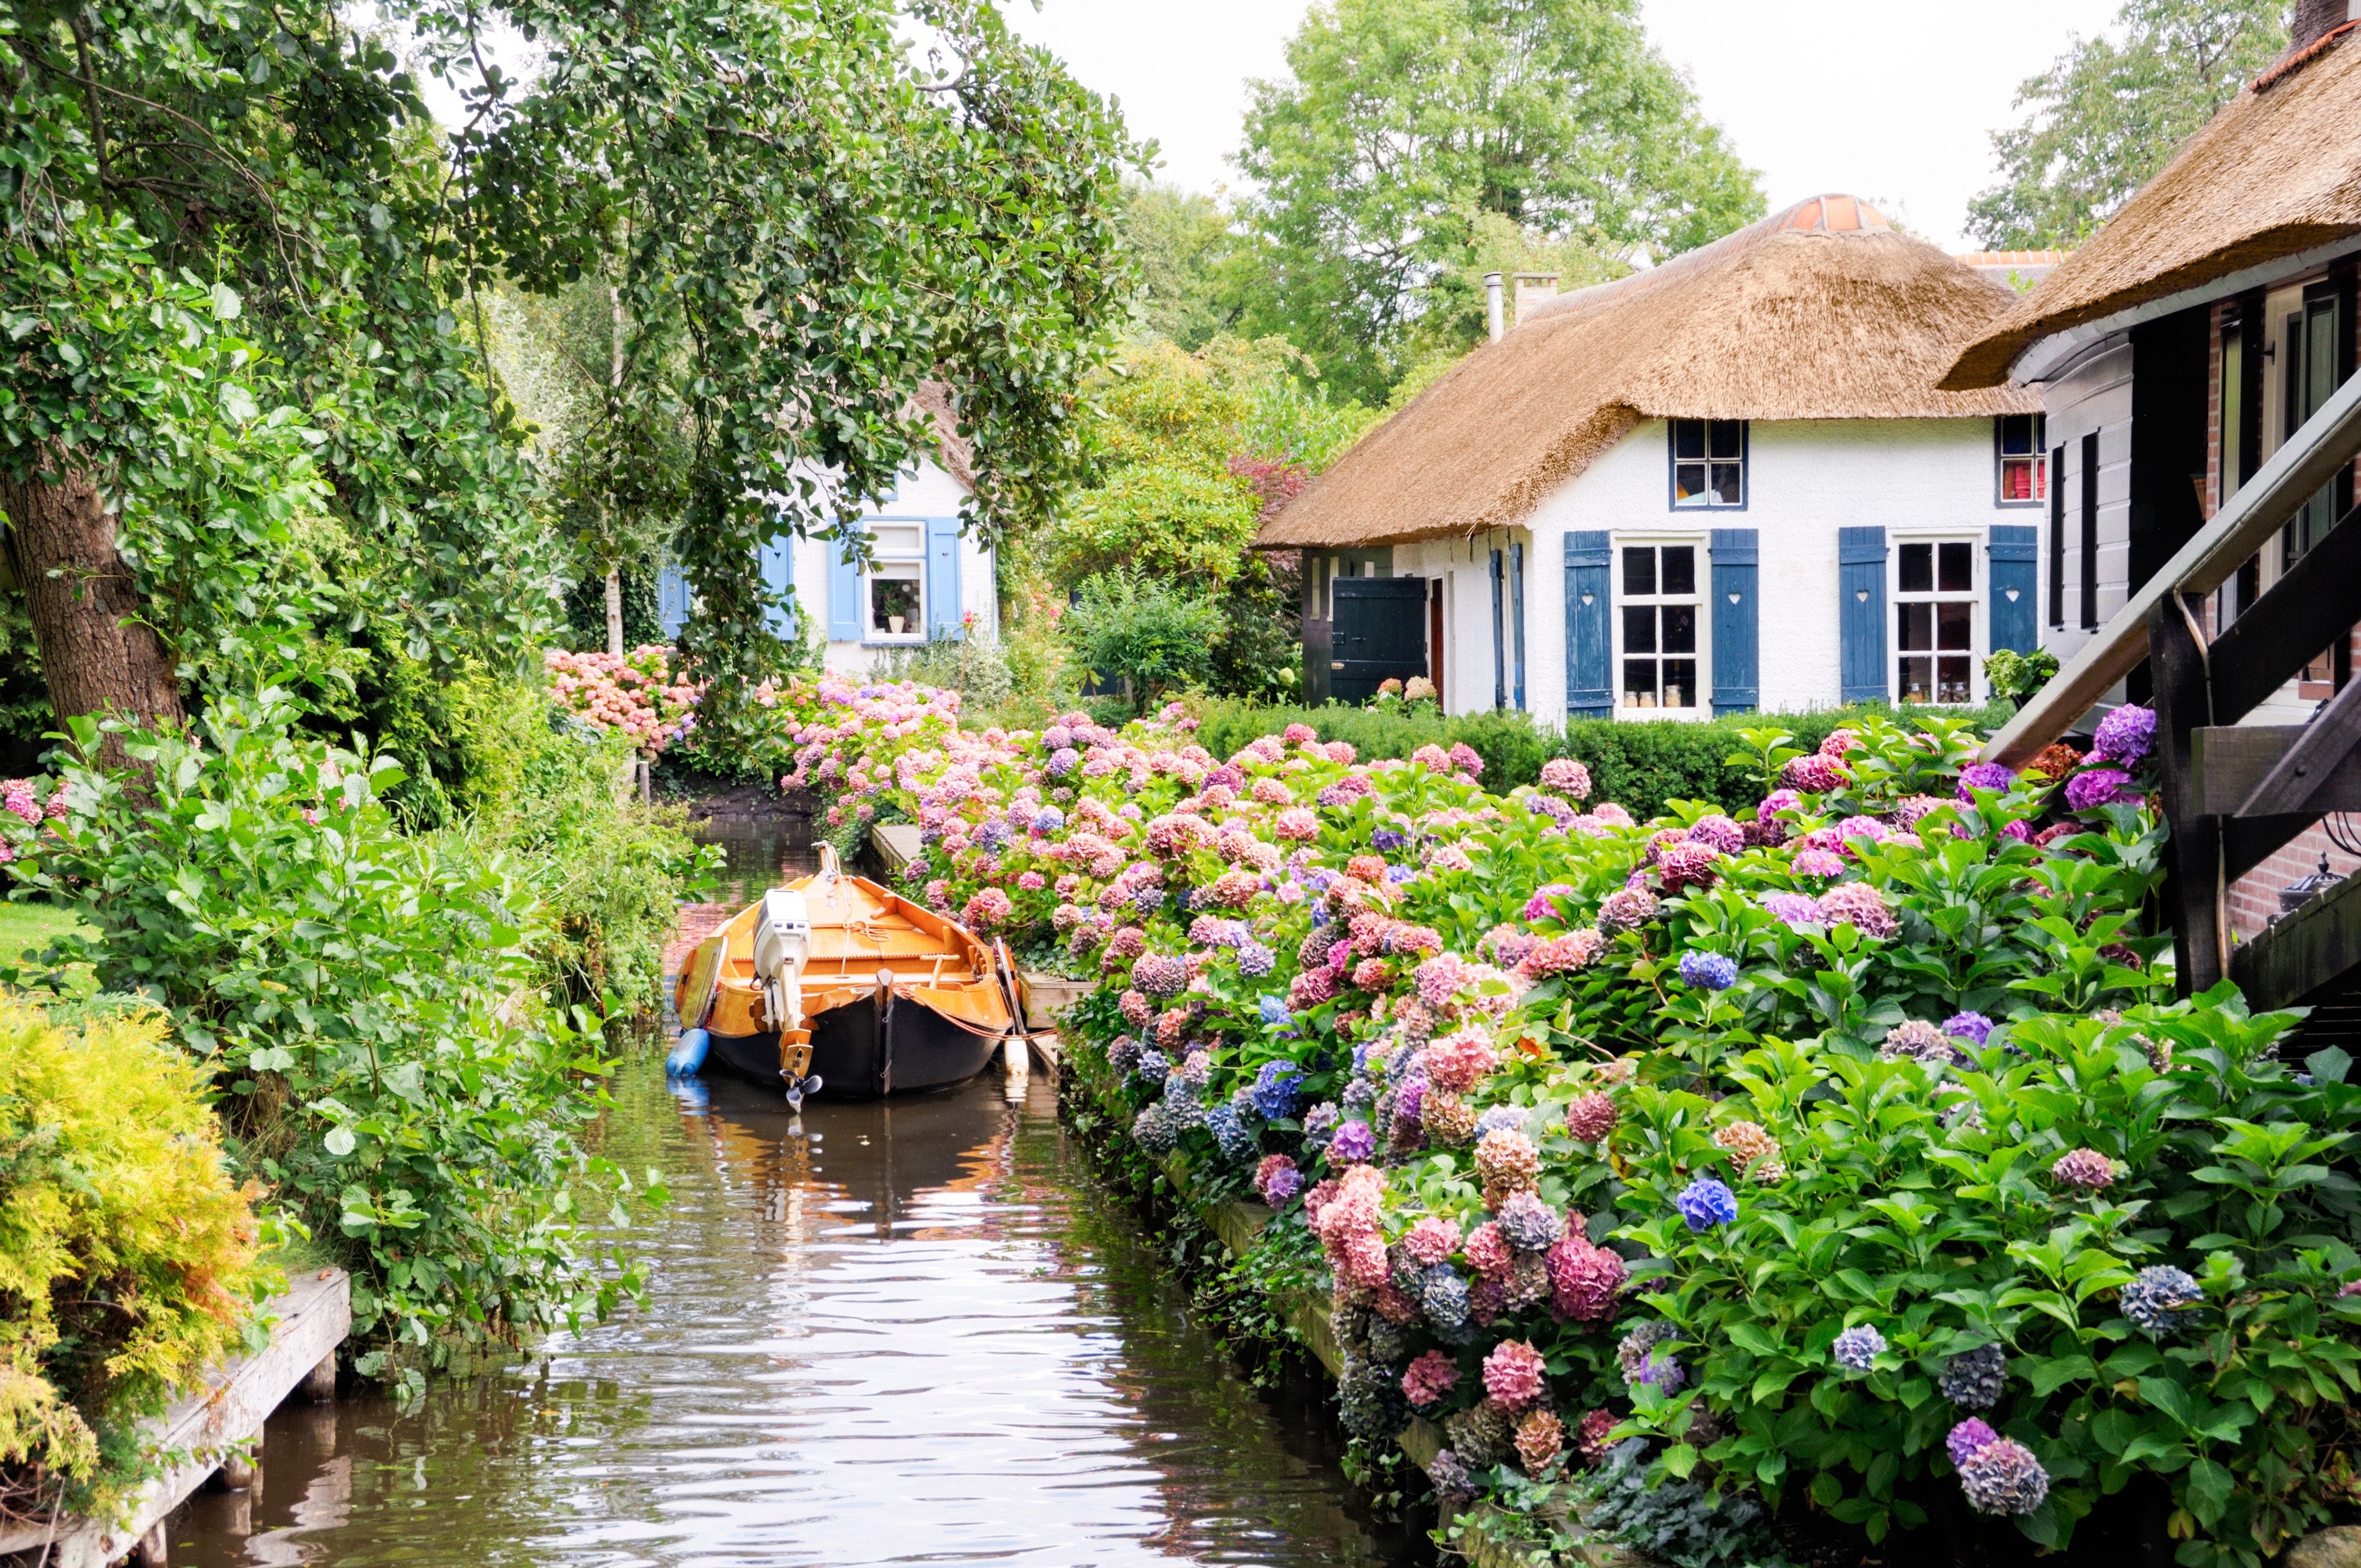 With its lack of roads and abundance of boat-filled canals, it makes sense that Giethoorn is affectionately referred to as the <a href="http://www.cntraveler.com/galleries/2015-09-25/the-instagram-famous-european-town-youve-never-heard-of/?mbid=synd_msn_rss&utm_source=msn&utm_medium=syndication">“Venice of the Netherlands”</a>. The village’s 18th-century farmhouses and wooden arch bridges can be explored via cycling lanes or aforementioned waterways—either by boat or, even better, by ice skating during the frozen winter months.<p>Sign up to receive the latest news, expert tips, and inspiration on all things travel</p><a href="https://www.cntraveler.com/newsletter/the-daily?sourceCode=msnsend">Inspire Me</a>